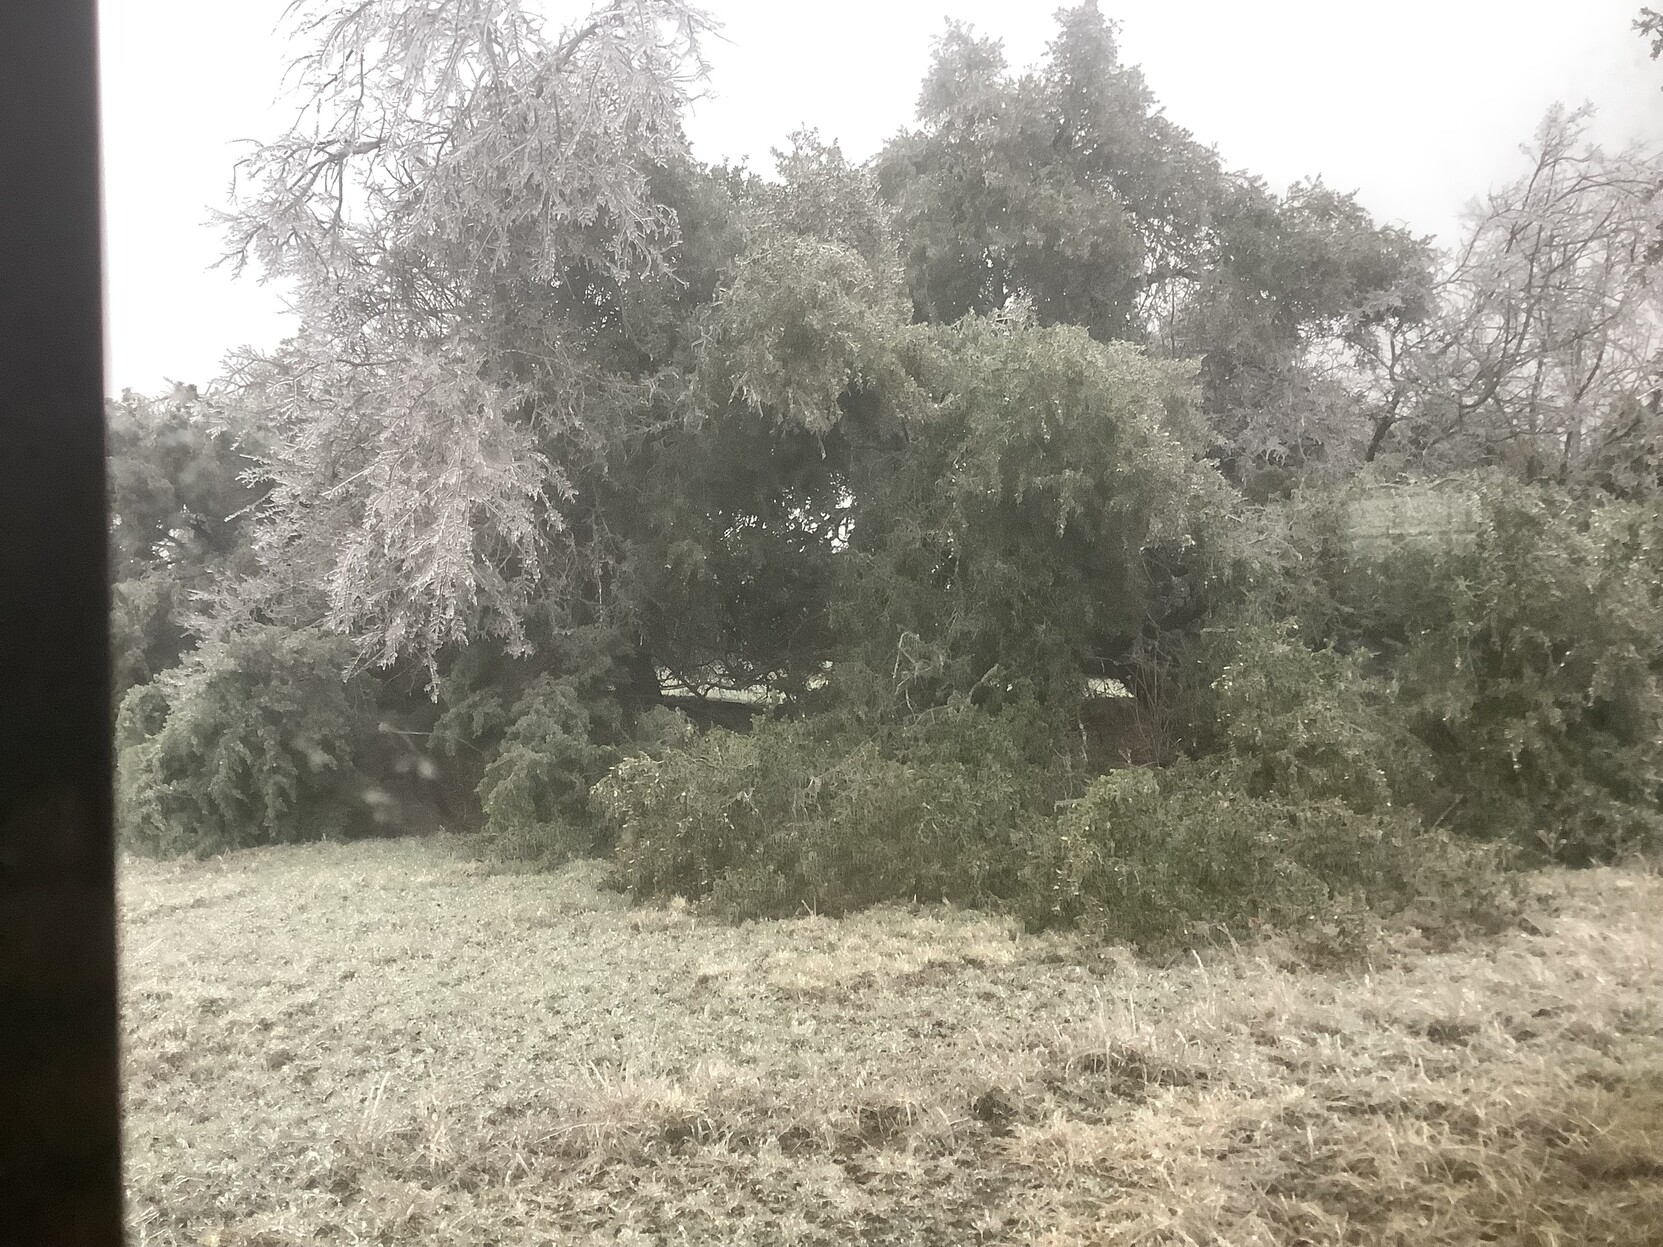 View outside window showing tree branches on the ground covered with ice. Ground is icy white.